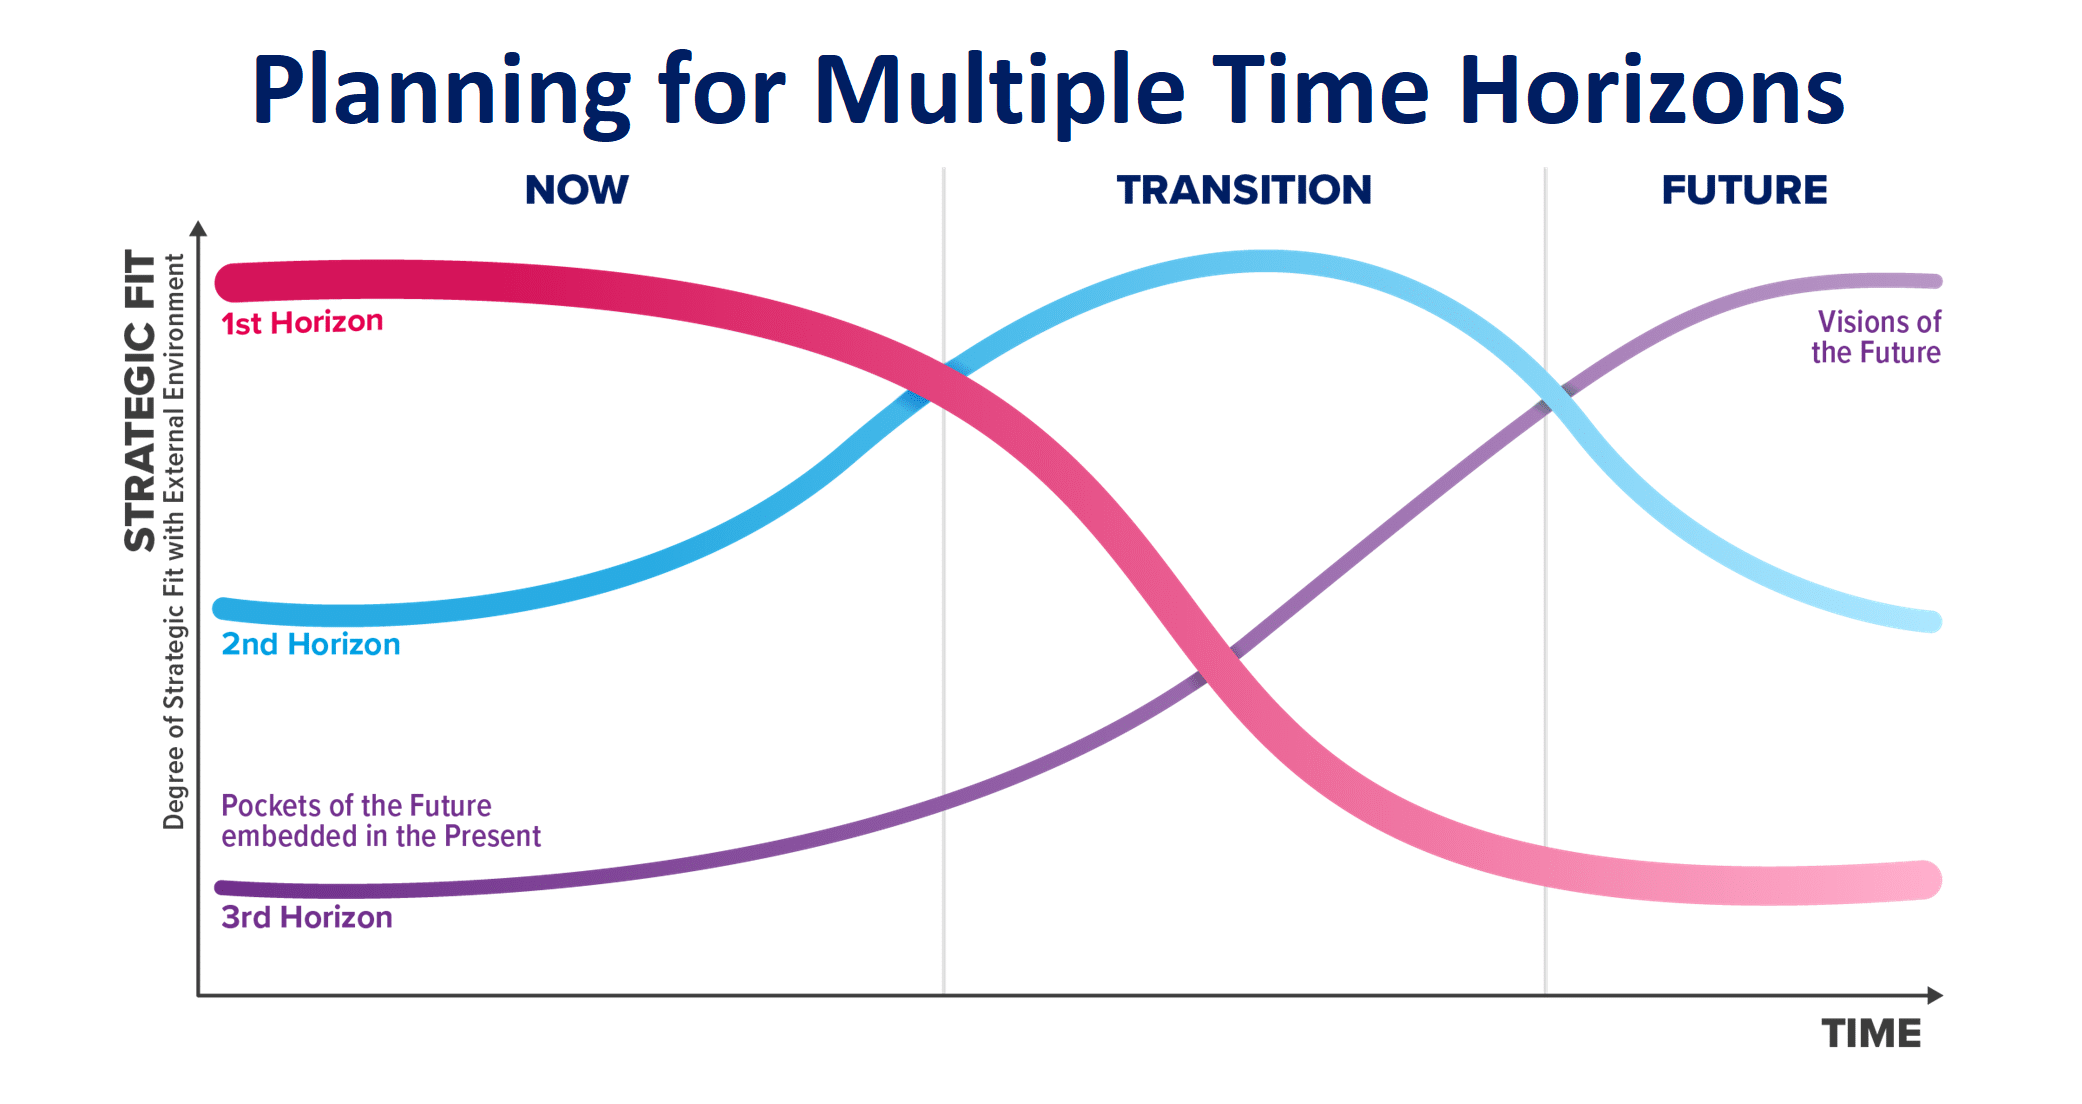 Graph titled Planning for Multiple Time Horizons. The horizontal axis is time, with points of Now, Transition, Future, and the vertical is strategic fit (degree of strategic fit with external environment). the first line, 1st horizon, starts at the top of the strategic fit in now, dips down to the bottom during the transition phase, and remains there. The 2nd Horizon starts in the middle of the strategic fit line and moves up to the top during the transition phase and moves back down to the middle during the future phase. The 3rd Horizon, "pockets of the future embedded in the Present," starts at the bottom, and moves up during the transition and keeps moving up through the future transition, the point labeled Visions of the Future.